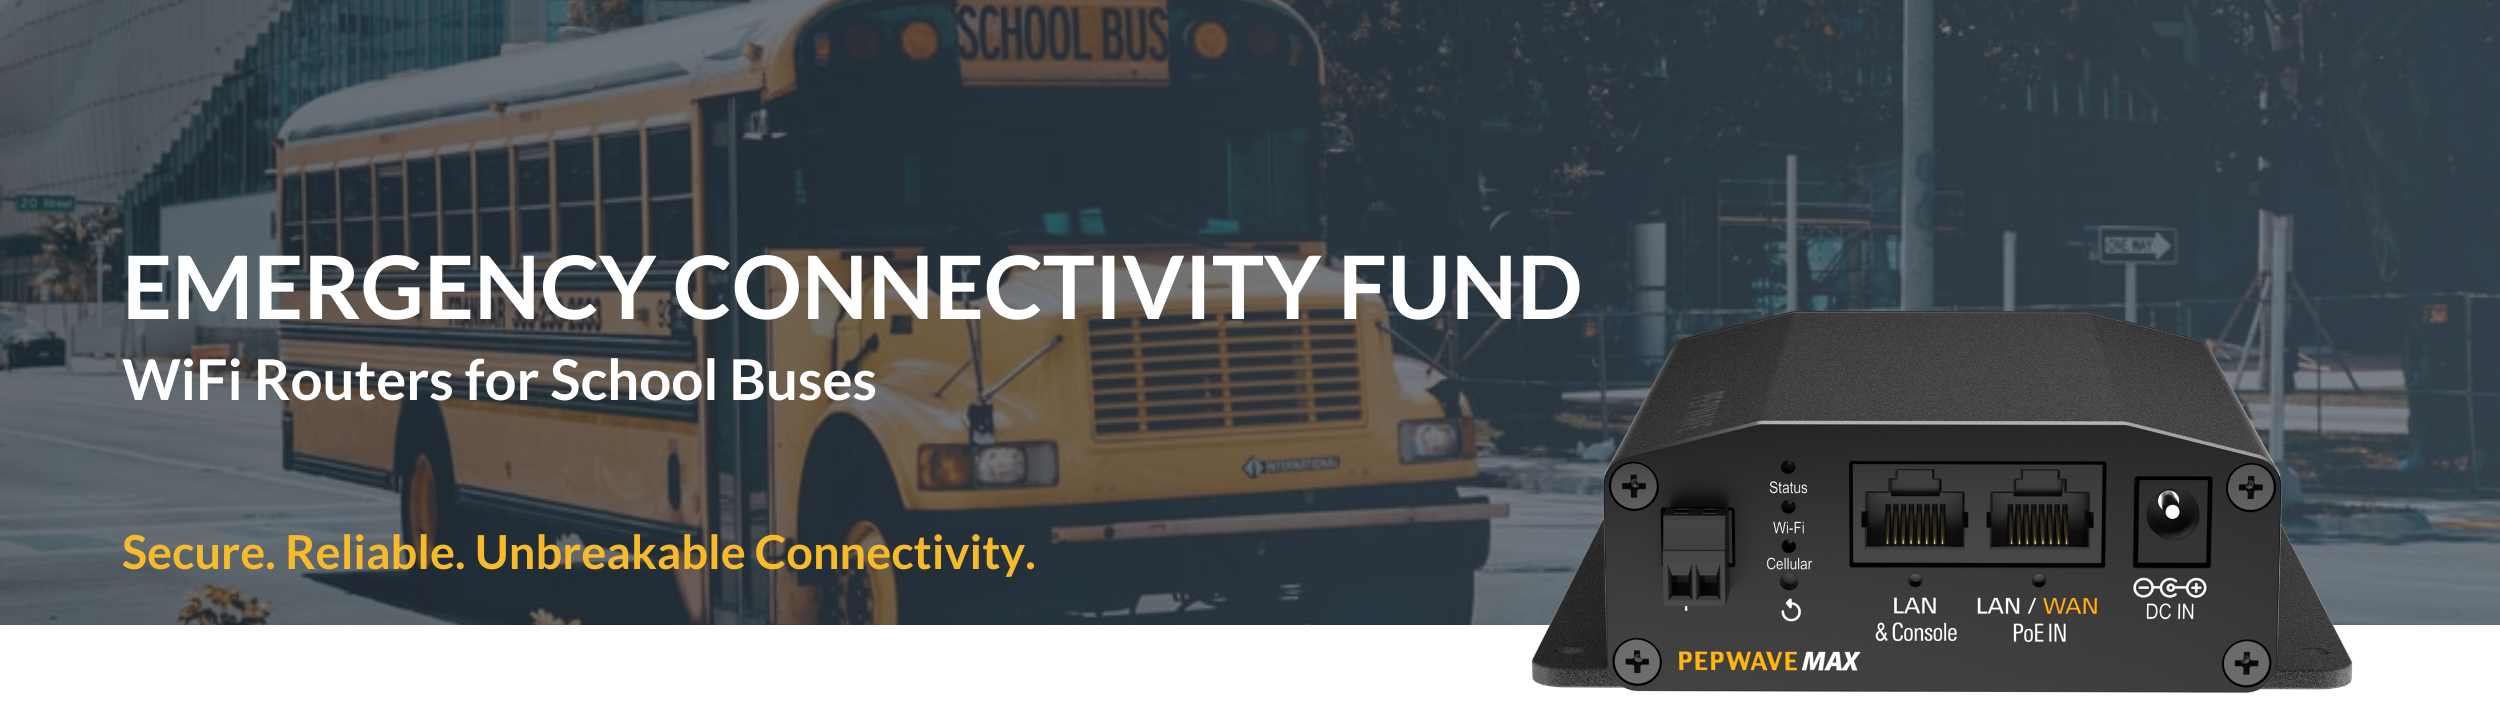 ECF Fund - WI-Fi Routers for School Buses